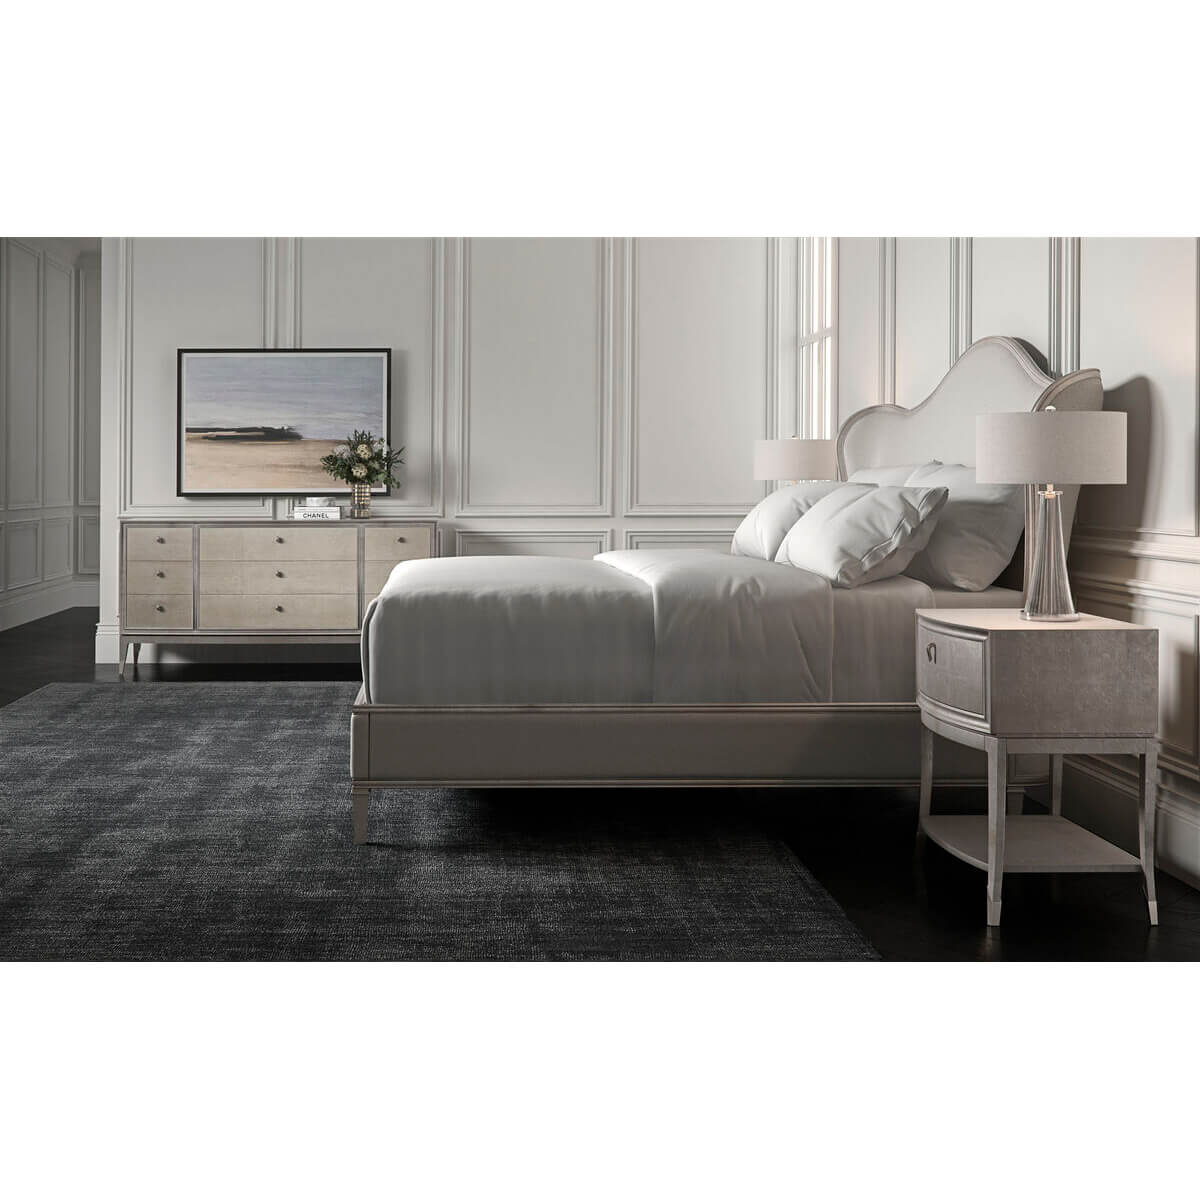 Transitional Style Upholstered King Bed in Silver - English Georgian America